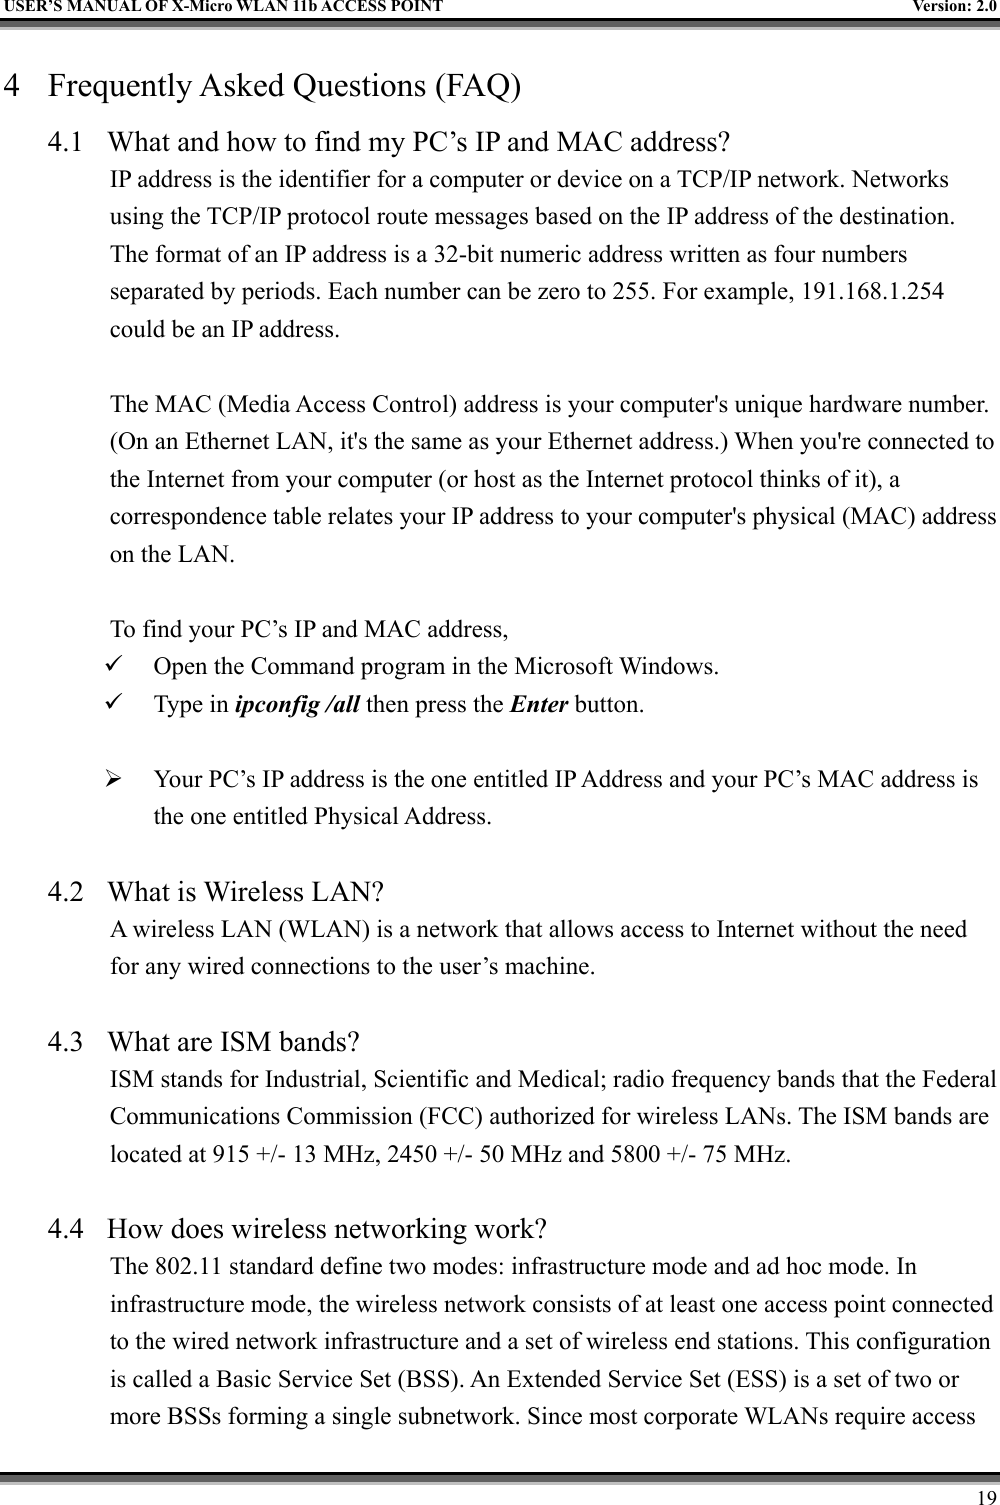   USER’S MANUAL OF X-Micro WLAN 11b ACCESS POINT  Version: 2.0 4  Frequently Asked Questions (FAQ) 4.1  What and how to find my PC’s IP and MAC address? IP address is the identifier for a computer or device on a TCP/IP network. Networks using the TCP/IP protocol route messages based on the IP address of the destination. The format of an IP address is a 32-bit numeric address written as four numbers separated by periods. Each number can be zero to 255. For example, 191.168.1.254 could be an IP address.  The MAC (Media Access Control) address is your computer&apos;s unique hardware number. (On an Ethernet LAN, it&apos;s the same as your Ethernet address.) When you&apos;re connected to the Internet from your computer (or host as the Internet protocol thinks of it), a correspondence table relates your IP address to your computer&apos;s physical (MAC) address on the LAN.  To find your PC’s IP and MAC address,   Open the Command program in the Microsoft Windows.   Type in ipconfig /all then press the Enter button.    Your PC’s IP address is the one entitled IP Address and your PC’s MAC address is the one entitled Physical Address.  4.2  What is Wireless LAN?   A wireless LAN (WLAN) is a network that allows access to Internet without the need for any wired connections to the user’s machine.    4.3  What are ISM bands?   ISM stands for Industrial, Scientific and Medical; radio frequency bands that the Federal Communications Commission (FCC) authorized for wireless LANs. The ISM bands are located at 915 +/- 13 MHz, 2450 +/- 50 MHz and 5800 +/- 75 MHz.    4.4  How does wireless networking work?   The 802.11 standard define two modes: infrastructure mode and ad hoc mode. In infrastructure mode, the wireless network consists of at least one access point connected to the wired network infrastructure and a set of wireless end stations. This configuration is called a Basic Service Set (BSS). An Extended Service Set (ESS) is a set of two or more BSSs forming a single subnetwork. Since most corporate WLANs require access     19 